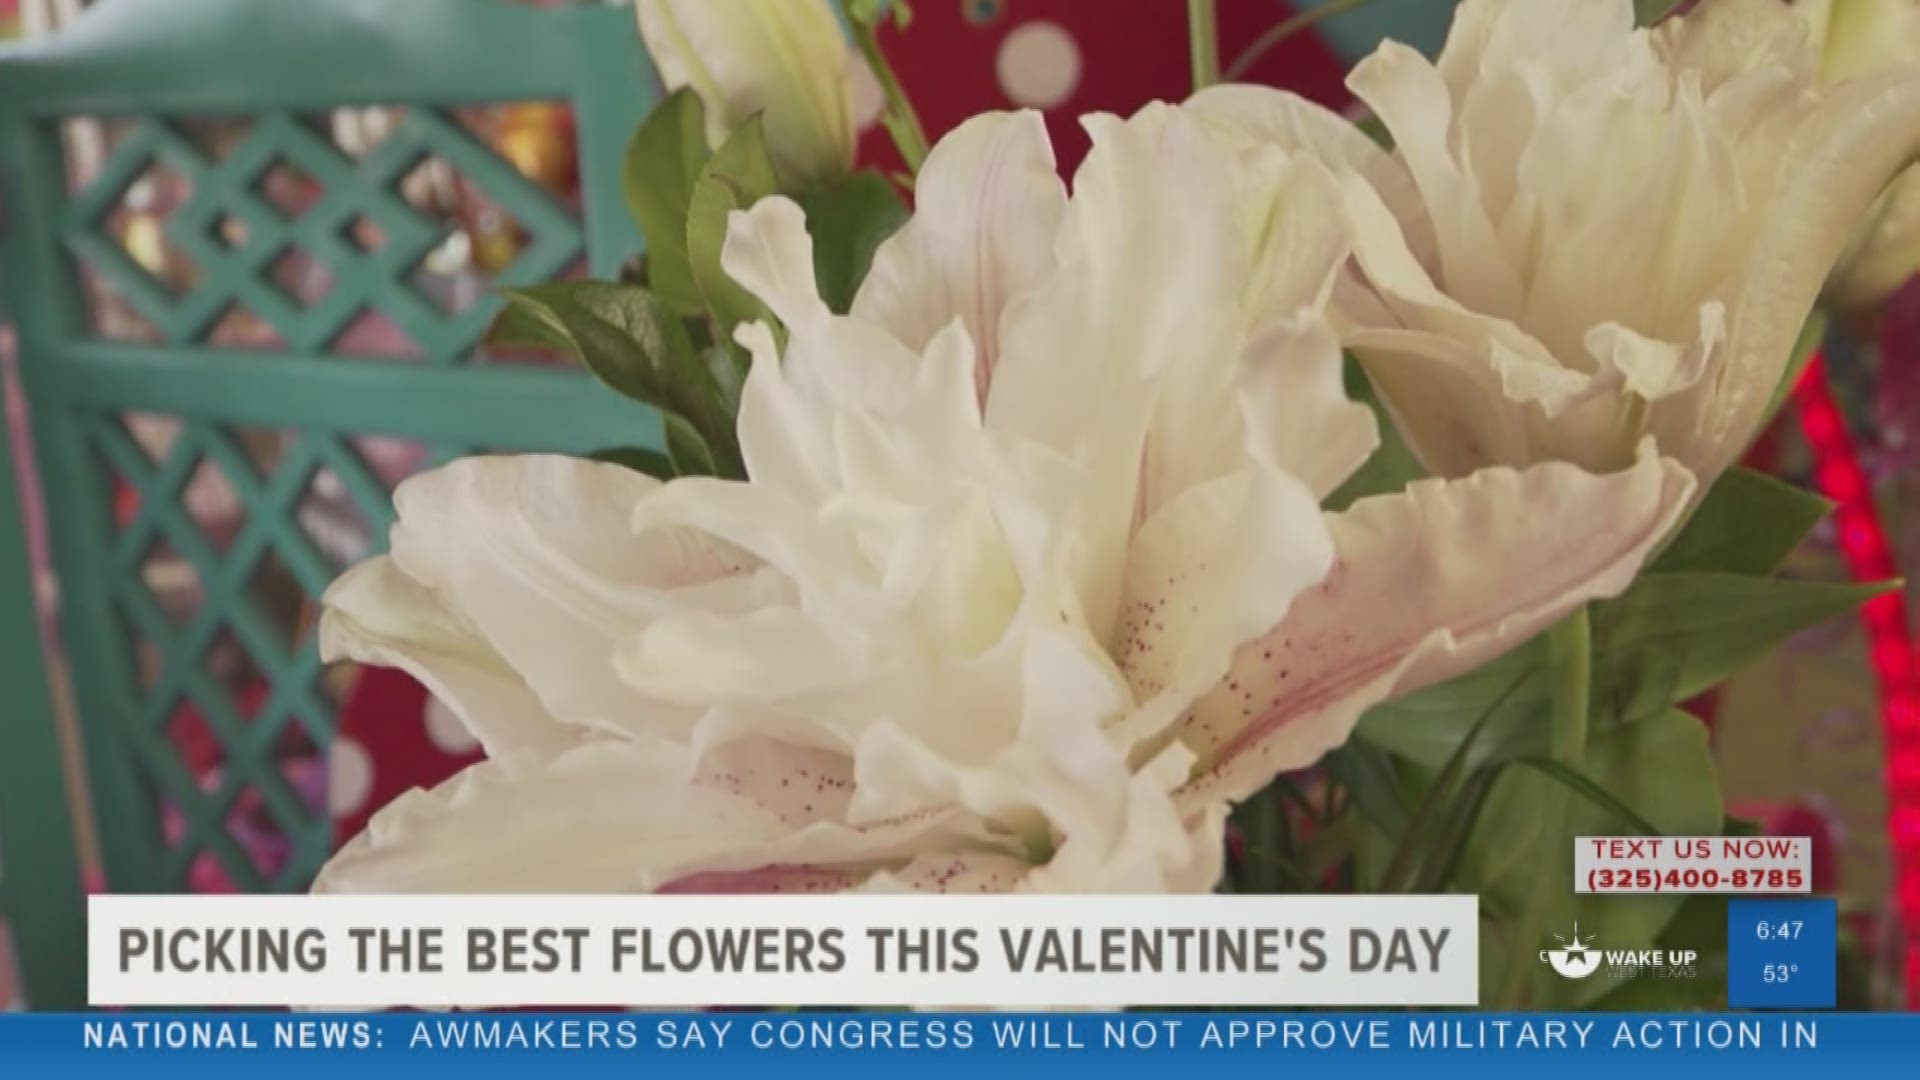 Our Malik Mingo spoke with Friendly Flower Shop for some tips on how to select the best flowers this Valentine's Day.